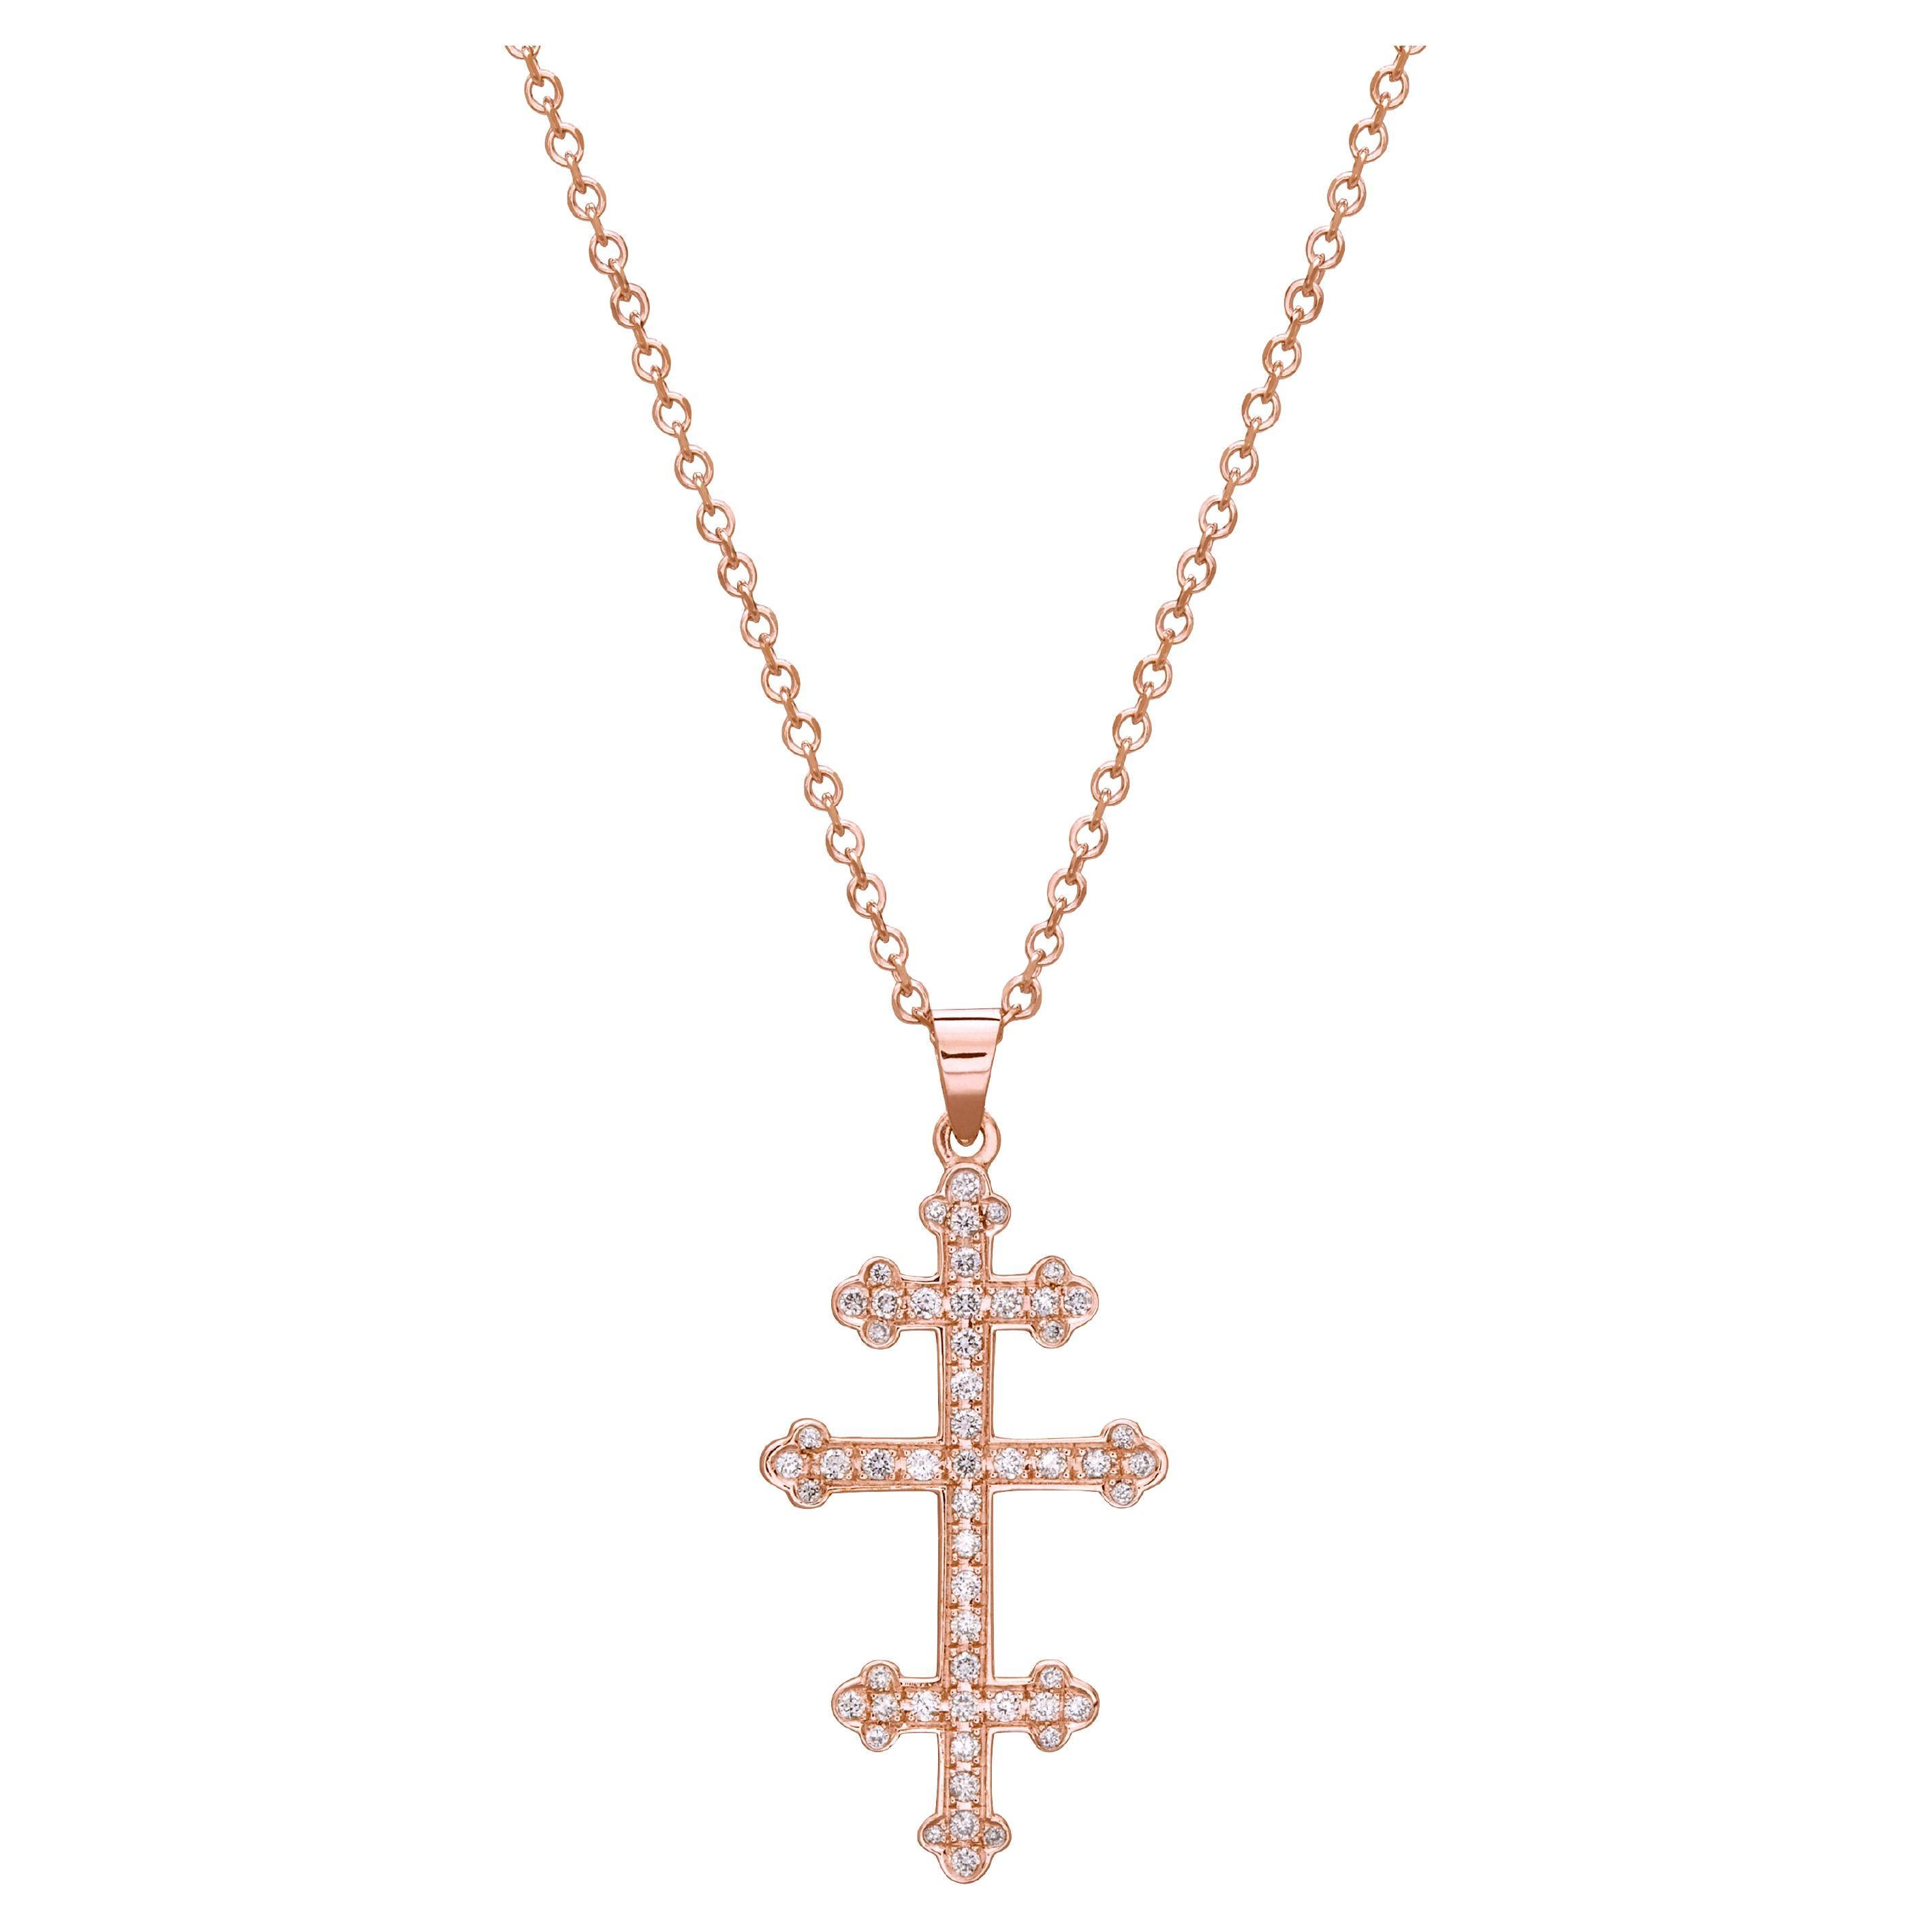 Cross, Pope's Cross Pendant Necklace in 18Kt Rose Gold with Pave Diamonds GMCKS For Sale